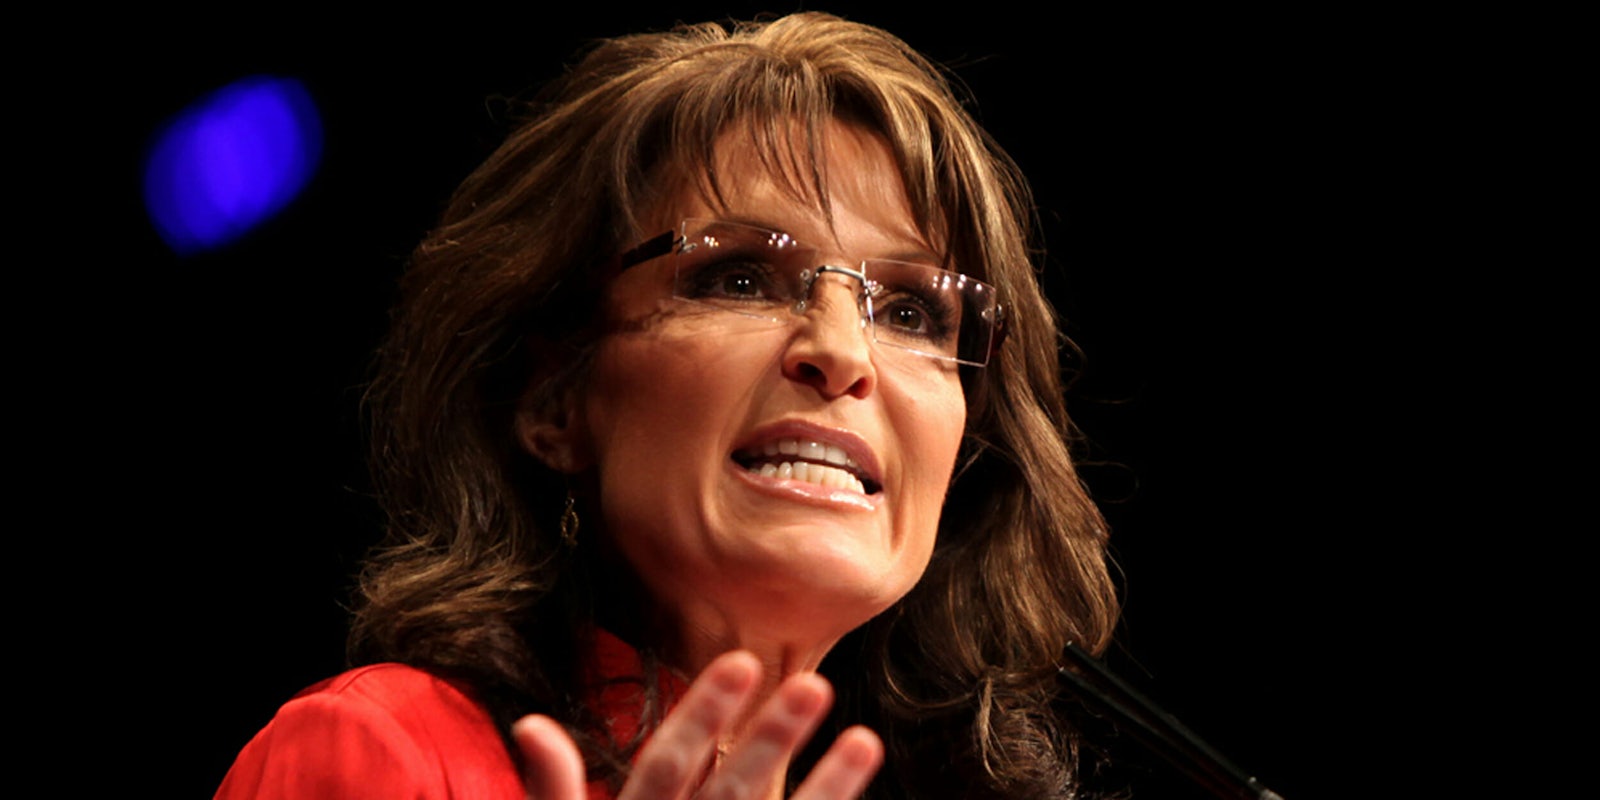 Sarah Palin is suing the New York Times for defamation.